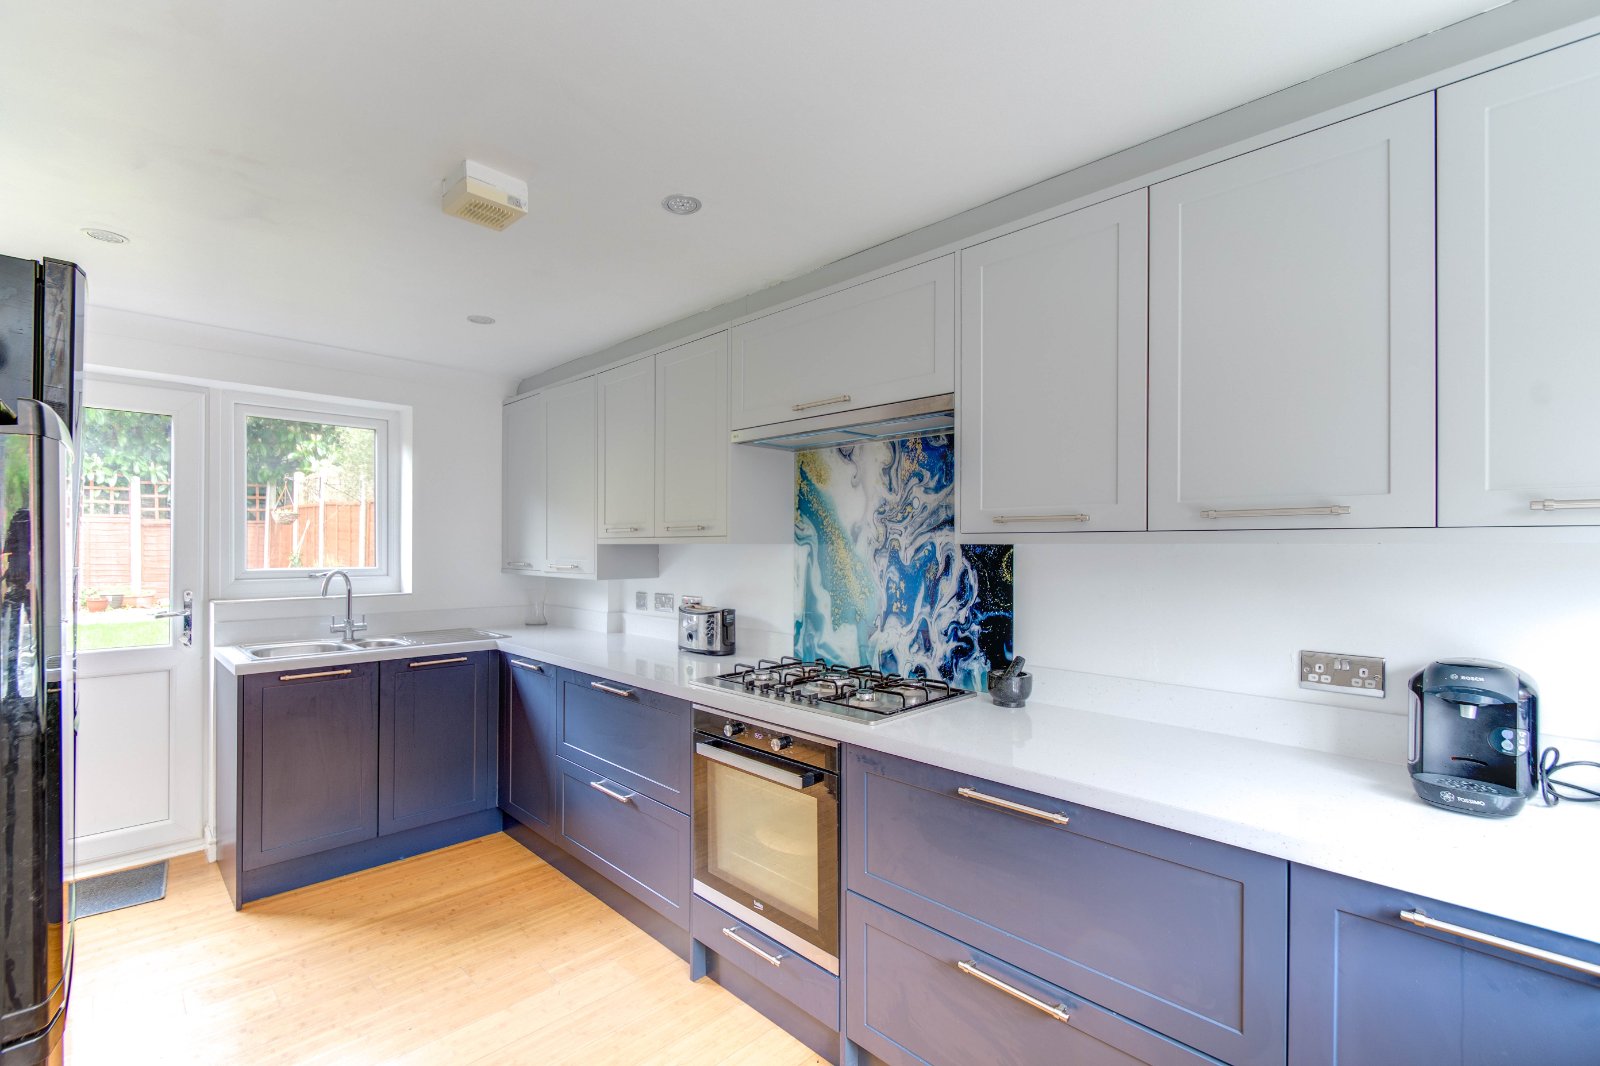 4 bed  for sale in Linthurst Road, Barnt Green 23